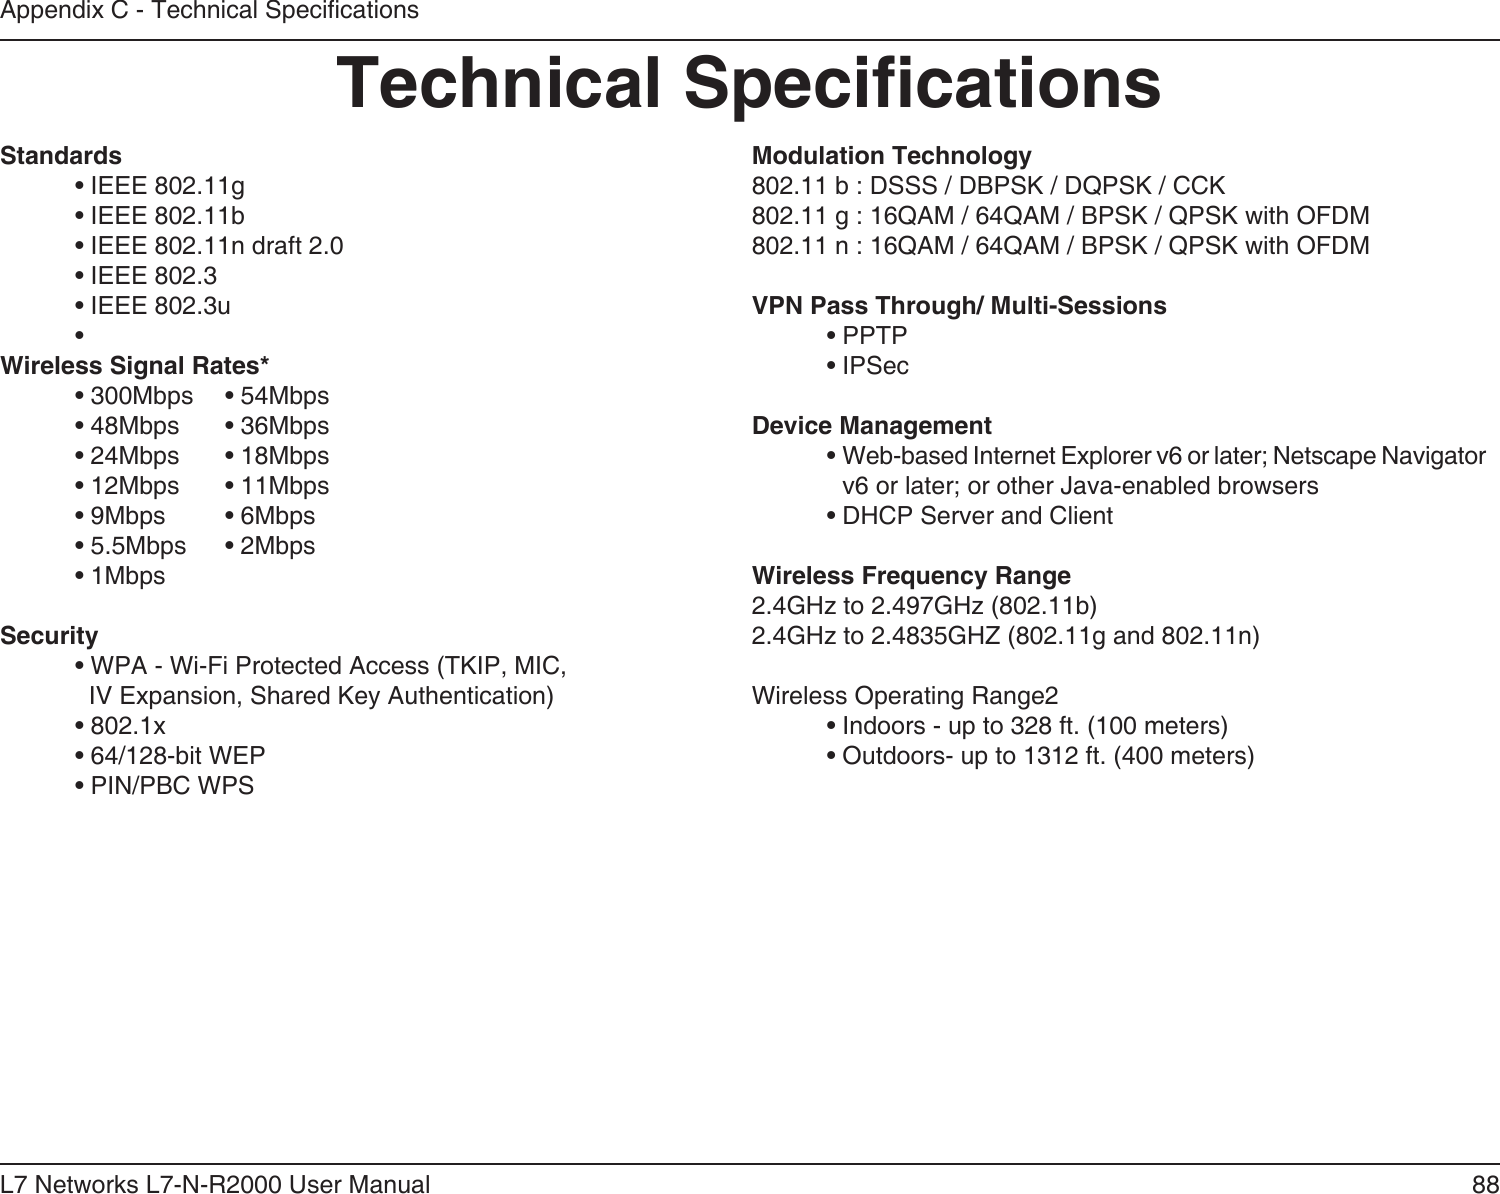 88L7 Networks L7-N-R2000 User ManualAppendix C - Technical SpecicationsTechnical SpecicationsStandards  • IEEE 802.11g  • IEEE 802.11b  • IEEE 802.11n draft 2.0  • IEEE 802.3  • IEEE 802.3u  • Wireless Signal Rates*  • 300Mbps  • 54Mbps   • 48Mbps  • 36Mbps  • 24Mbps  • 18Mbps  • 12Mbps  • 11Mbps   • 9Mbps  • 6Mbps   • 5.5Mbps  • 2Mbps   • 1MbpsSecurity  • WPA - Wi-Fi Protected Access (TKIP, MIC,    IV Expansion, Shared Key Authentication)  • 802.1x  • 64/128-bit WEP  • PIN/PBC WPSModulation Technology802.11 b : DSSS / DBPSK / DQPSK / CCK802.11 g : 16QAM / 64QAM / BPSK / QPSK with OFDM 802.11 n : 16QAM / 64QAM / BPSK / QPSK with OFDMVPN Pass Through/ Multi-Sessions  • PPTP   • IPSecDevice Management  •  Web-based Internet Explorer v6 or later; Netscape Navigator v6 or later; or other Java-enabled browsers  • DHCP Server and ClientWireless Frequency Range2.4GHz to 2.497GHz (802.11b)2.4GHz to 2.4835GHZ (802.11g and 802.11n)Wireless Operating Range2  • Indoors - up to 328 ft. (100 meters)  • Outdoors- up to 1312 ft. (400 meters)